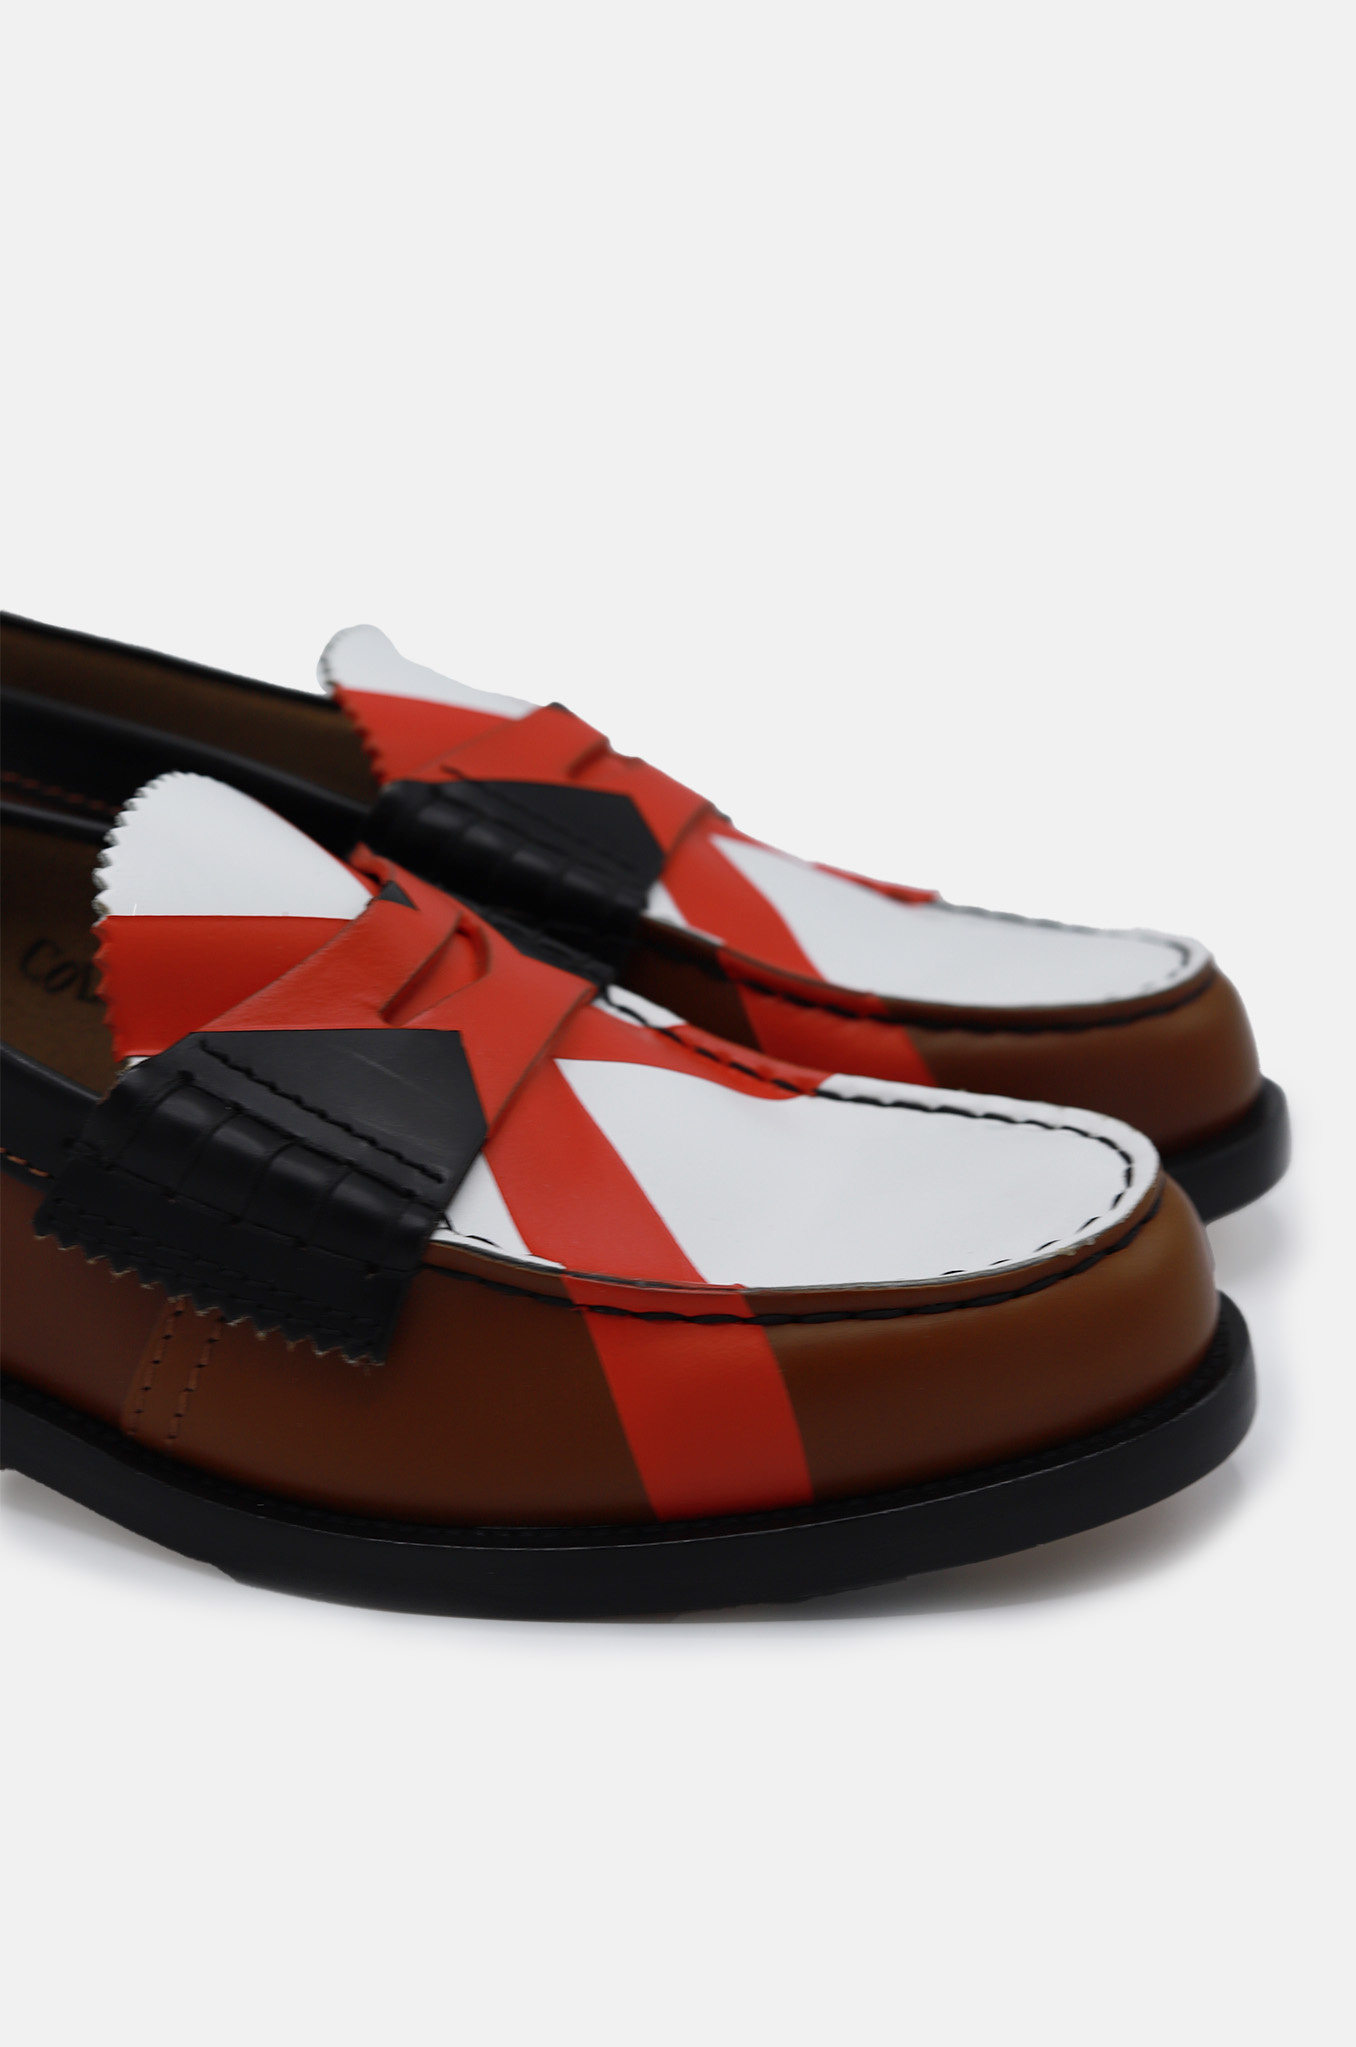 Loafers in Tan Black White X Red-7